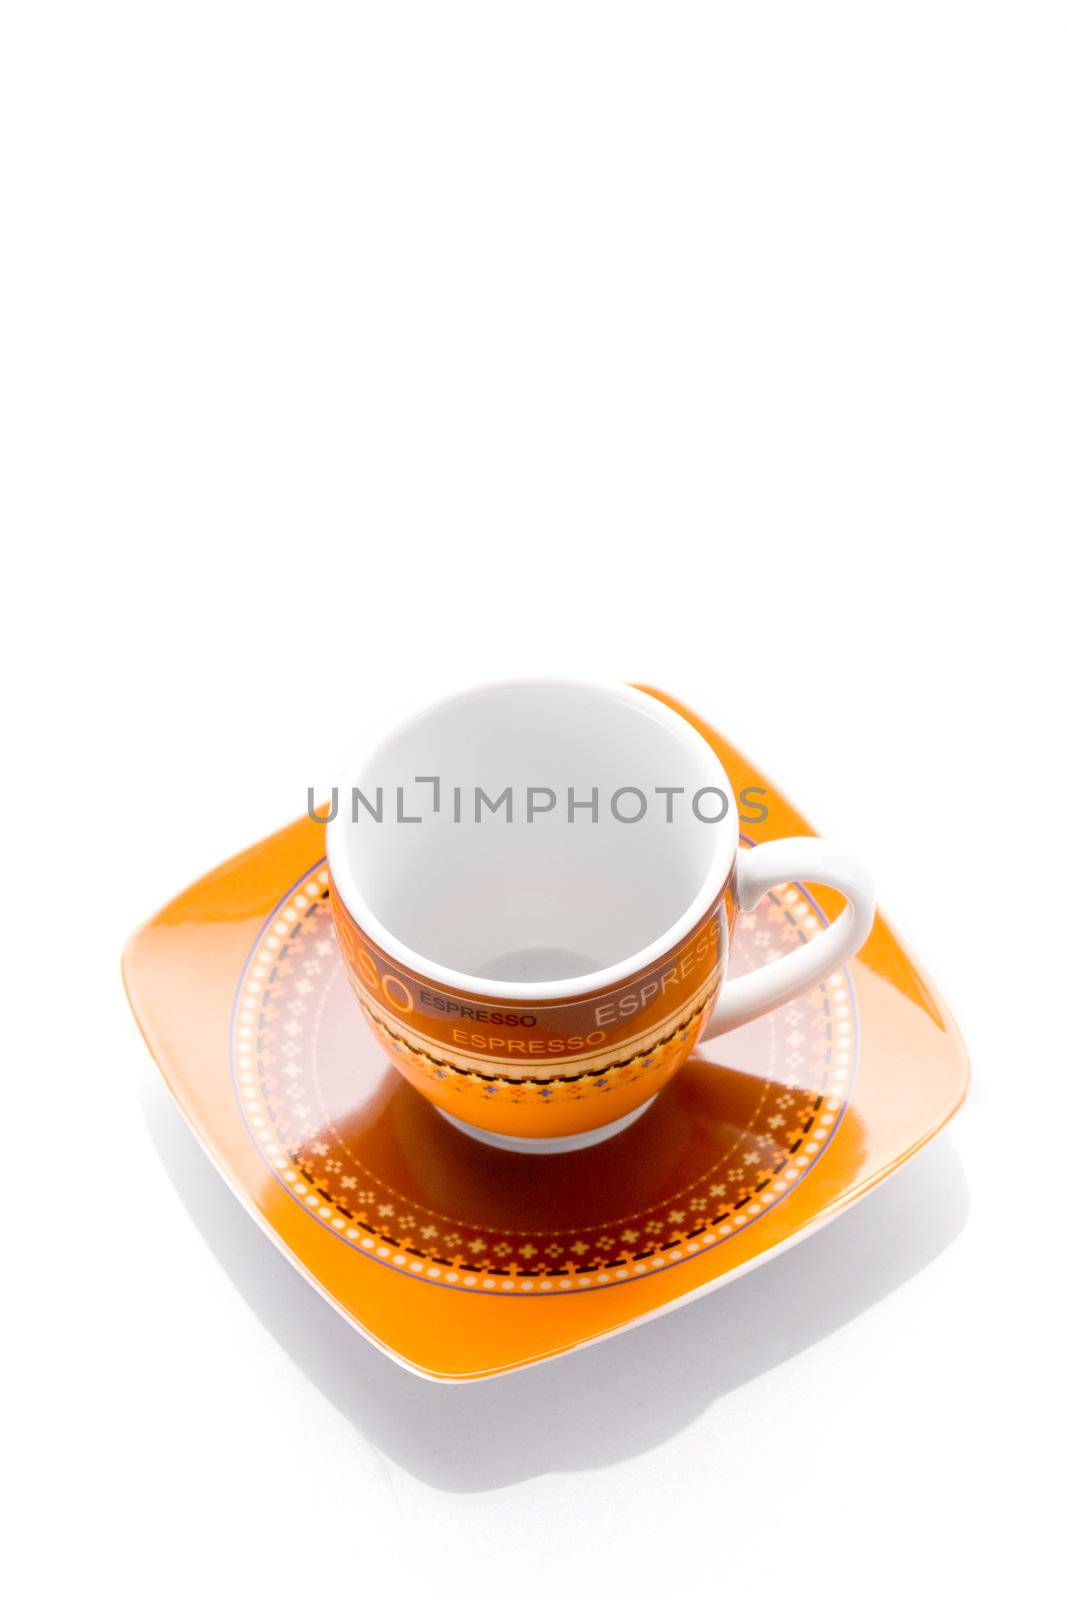 empty orange cup of coffee, isolated on white